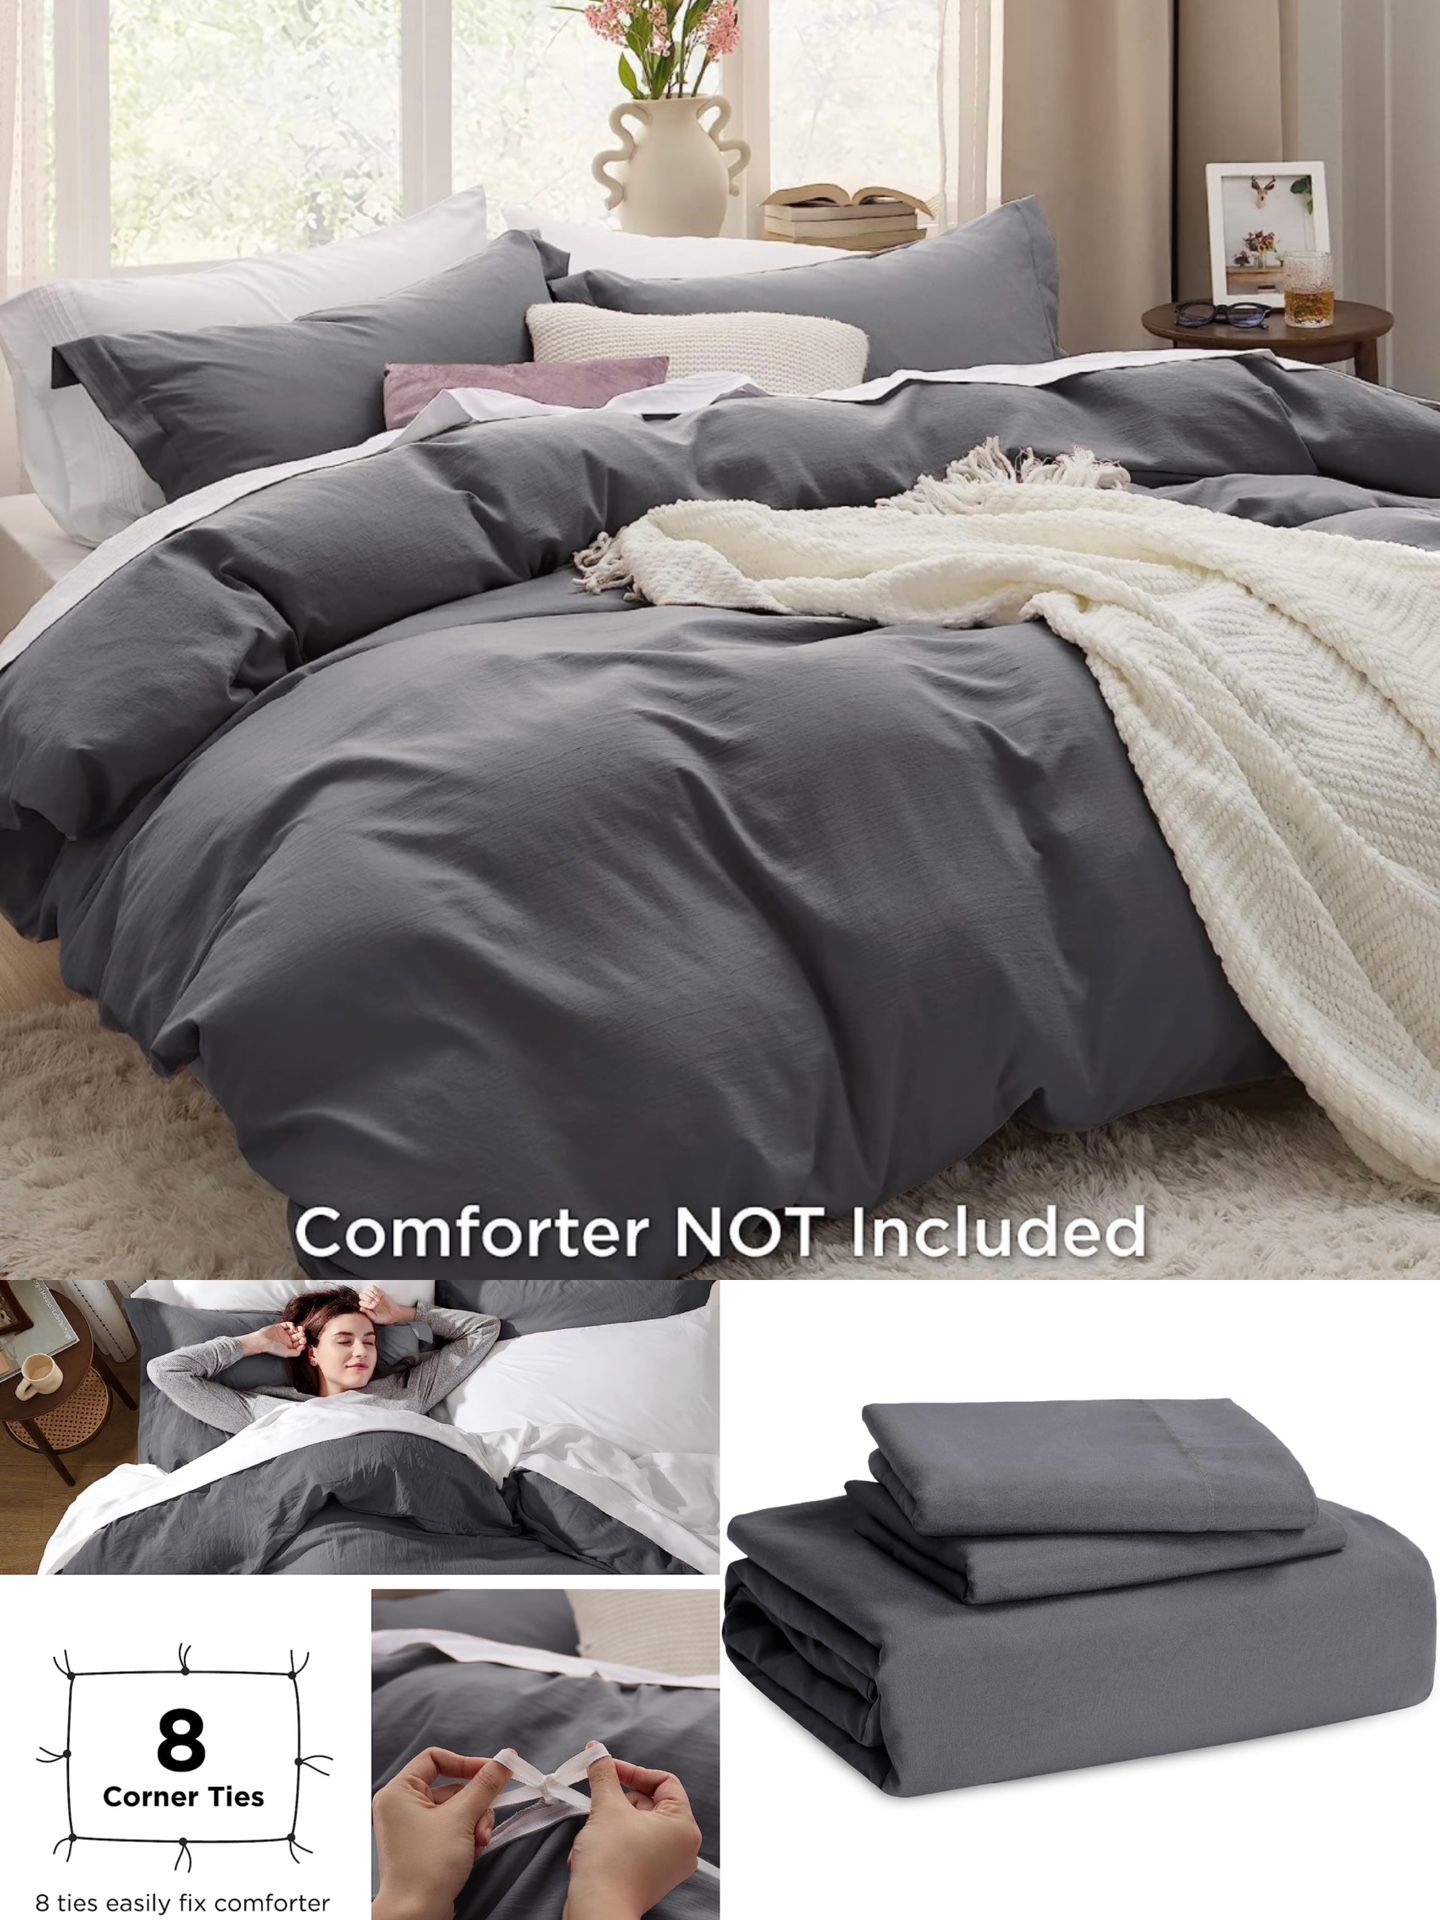 Dark Grey Duvet Cover King Size - Soft Prewashed Set, 3 Pieces, 1 Duvet Cover 104x90 Inches with Zipper Closure and 2 Pillow Shams, Comforter Not Incl